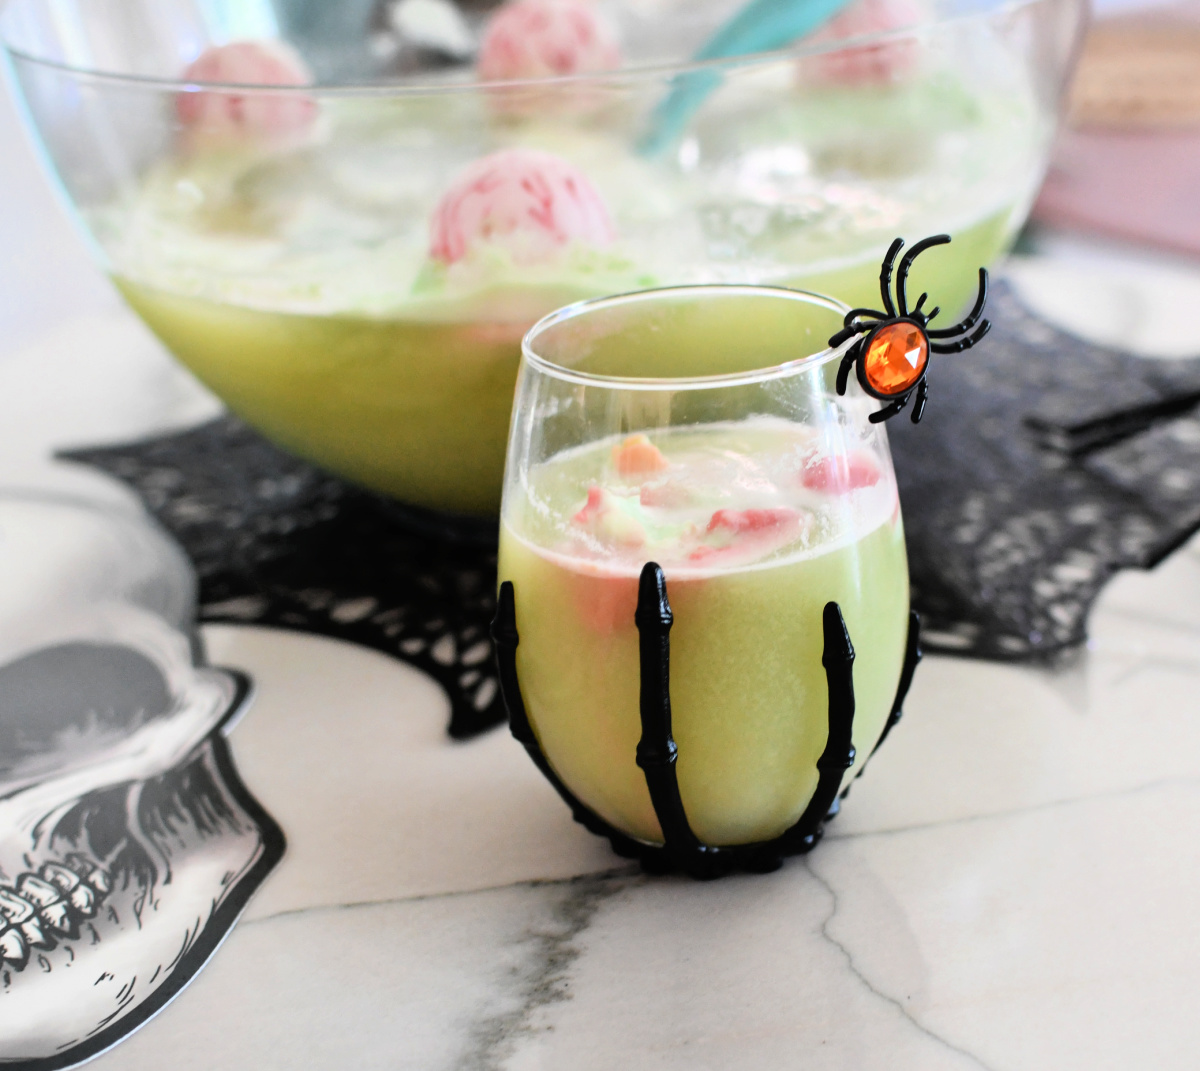 https://hip2save.com/wp-content/uploads/2015/10/halloween-wine-glass-with-halloween-punch-.jpeg?fit=1200%2C1071&strip=all